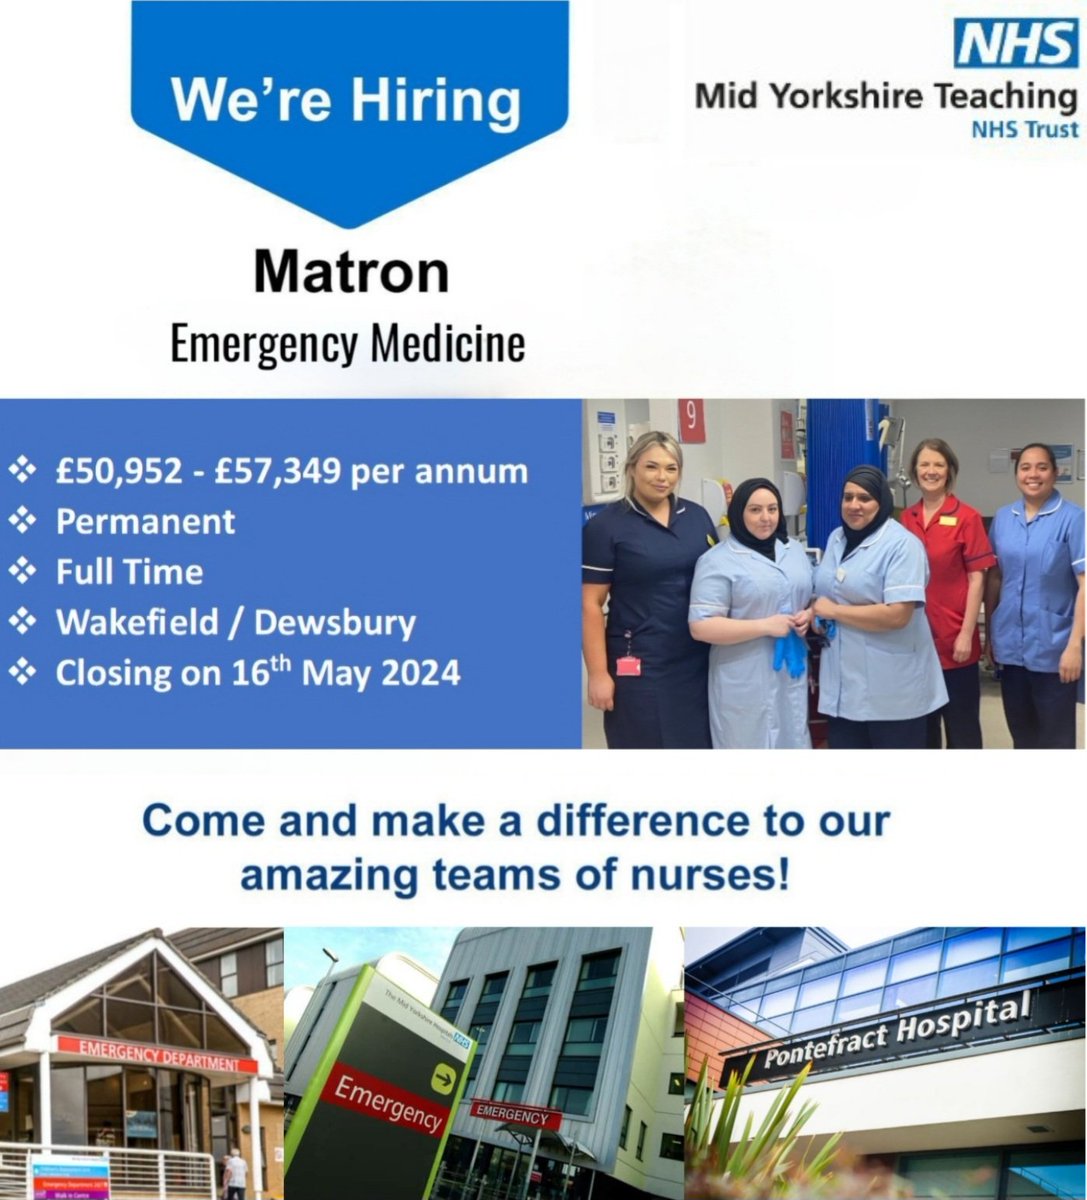 An exciting opportunity has arisen to join our dedicated senior nursing team @myttacd @MidYorkshireNHS with a focus on Emergency Care Services. For more information and to apply click the link below 👇 jobs.nhs.uk/candidate/joba… #NHS #EDTeam #nurserecruitment #MYTeam #Recruiting